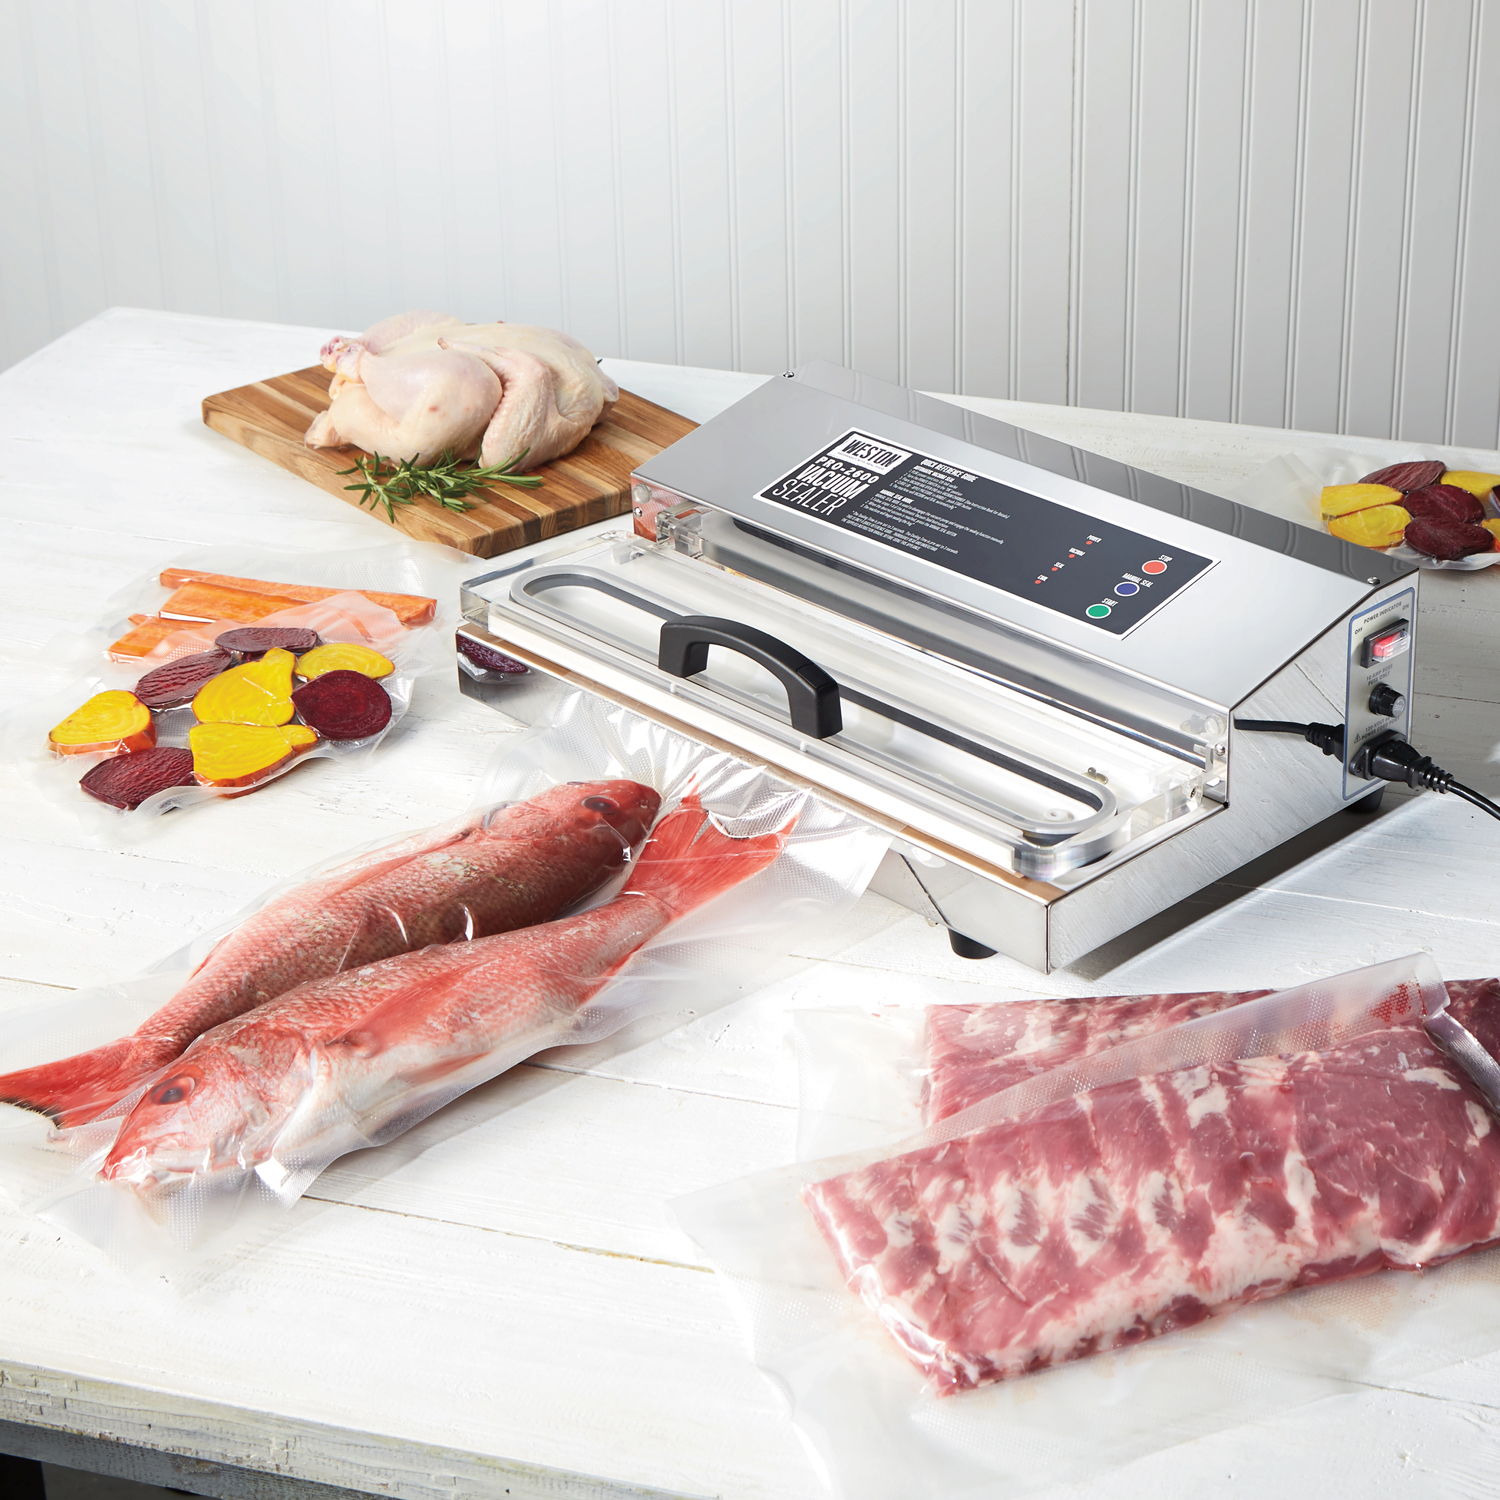 The 365 Day Season: Preserve your food with a vacuum sealer